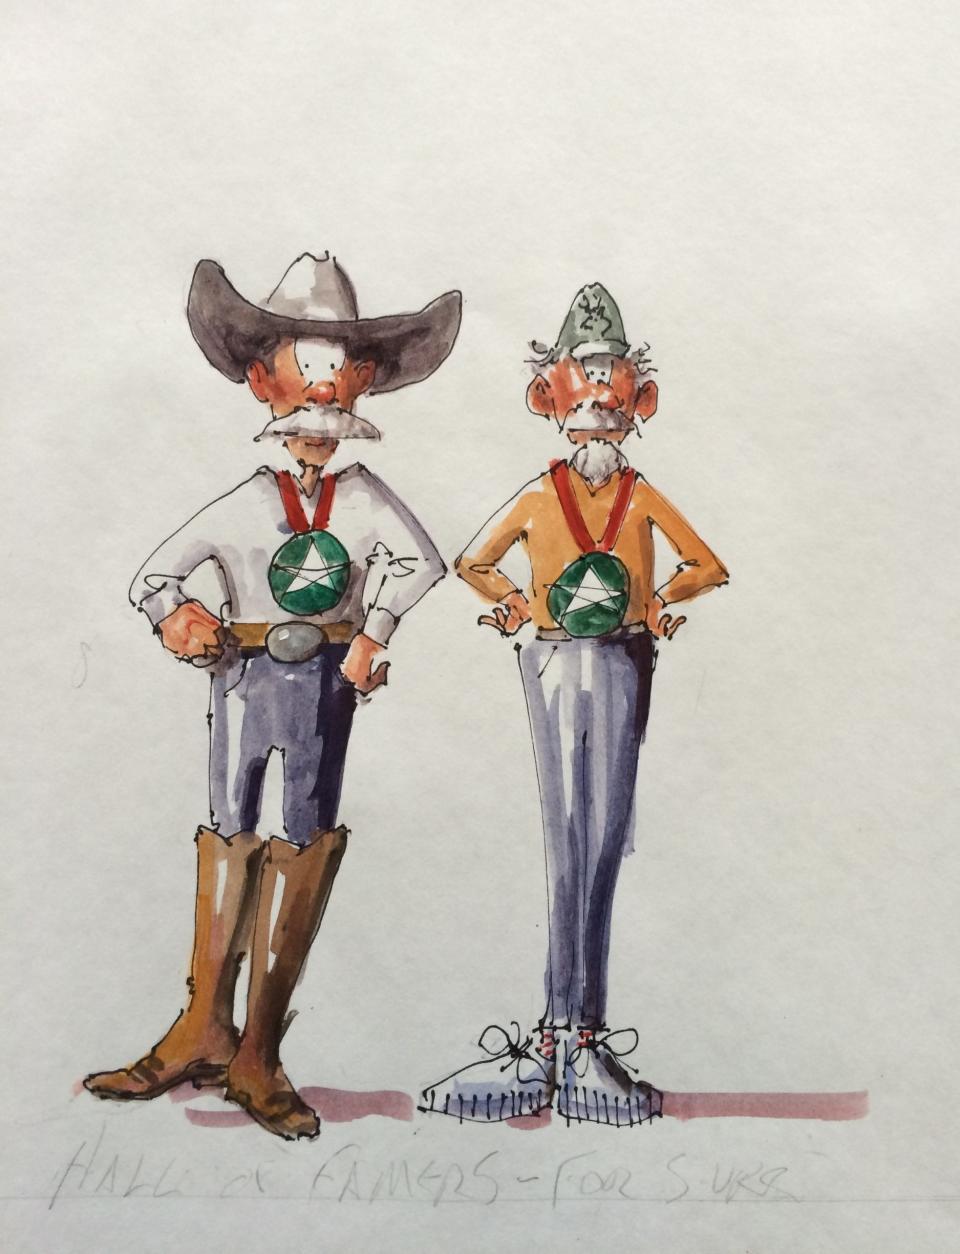 Oklahoma artists and close friends Harold T. Holden, left, and Mike Larsen are depicted in a cartoon created by Larsen. Works by both artists are included in the exhibit "Cowboys and Indians," on view through Feb. 29 at JRB Art at the Elms gallery in Oklahoma City. It is the first exhibit of Holden's works since the celebrated cowboy artist died Dec. 6, 2023, at age 83.